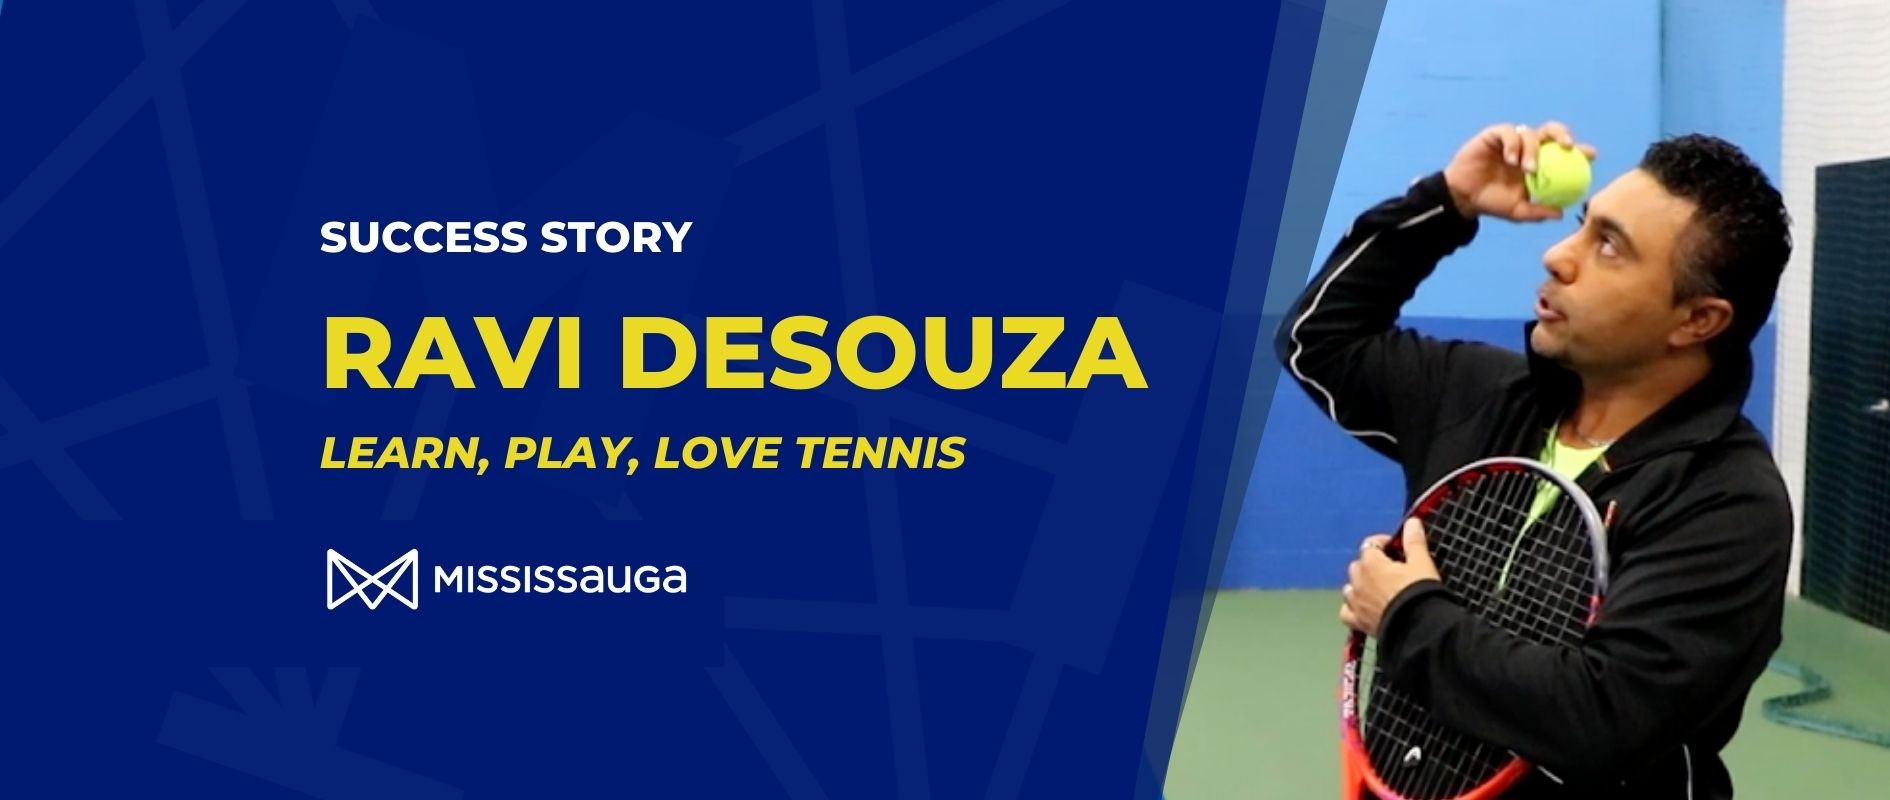 You are currently viewing An Ace Video Library with Top Spin – The Winning Edge: Learn, Play Love Tennis’ Ravi DeSouza